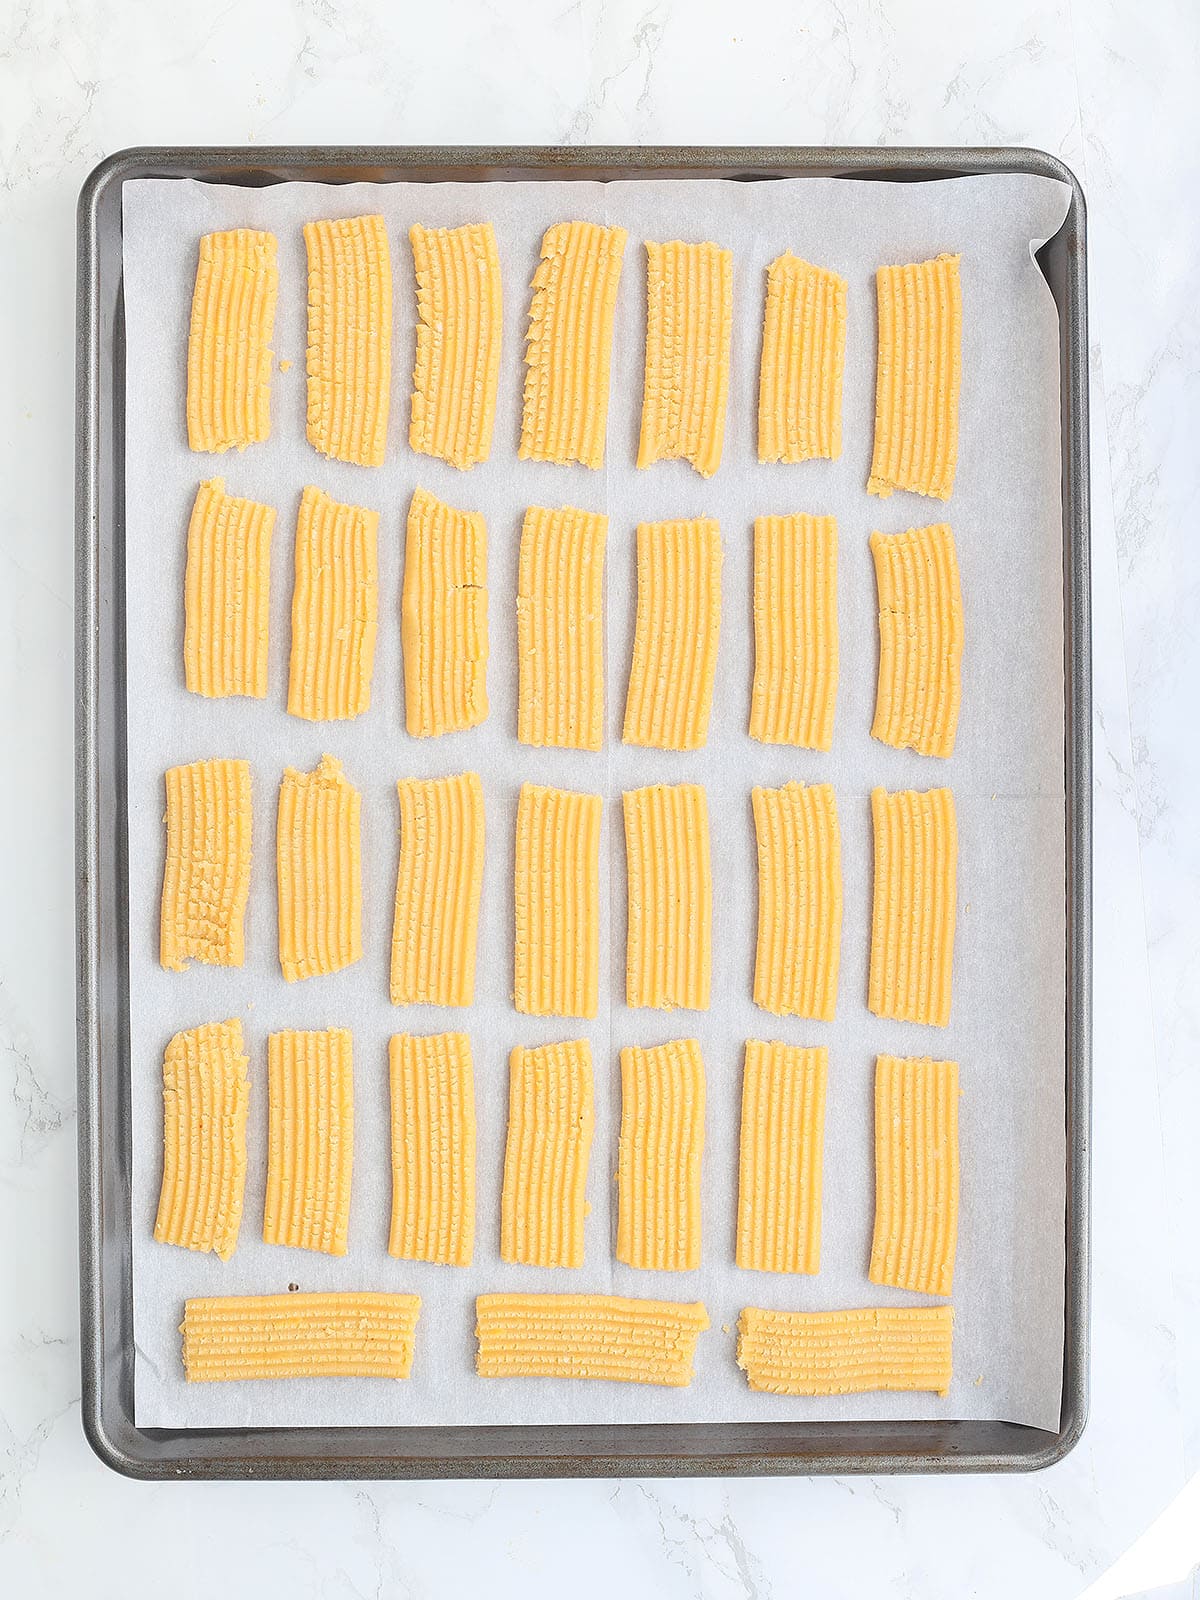 unbaked cheese straw dough on a baking sheet.